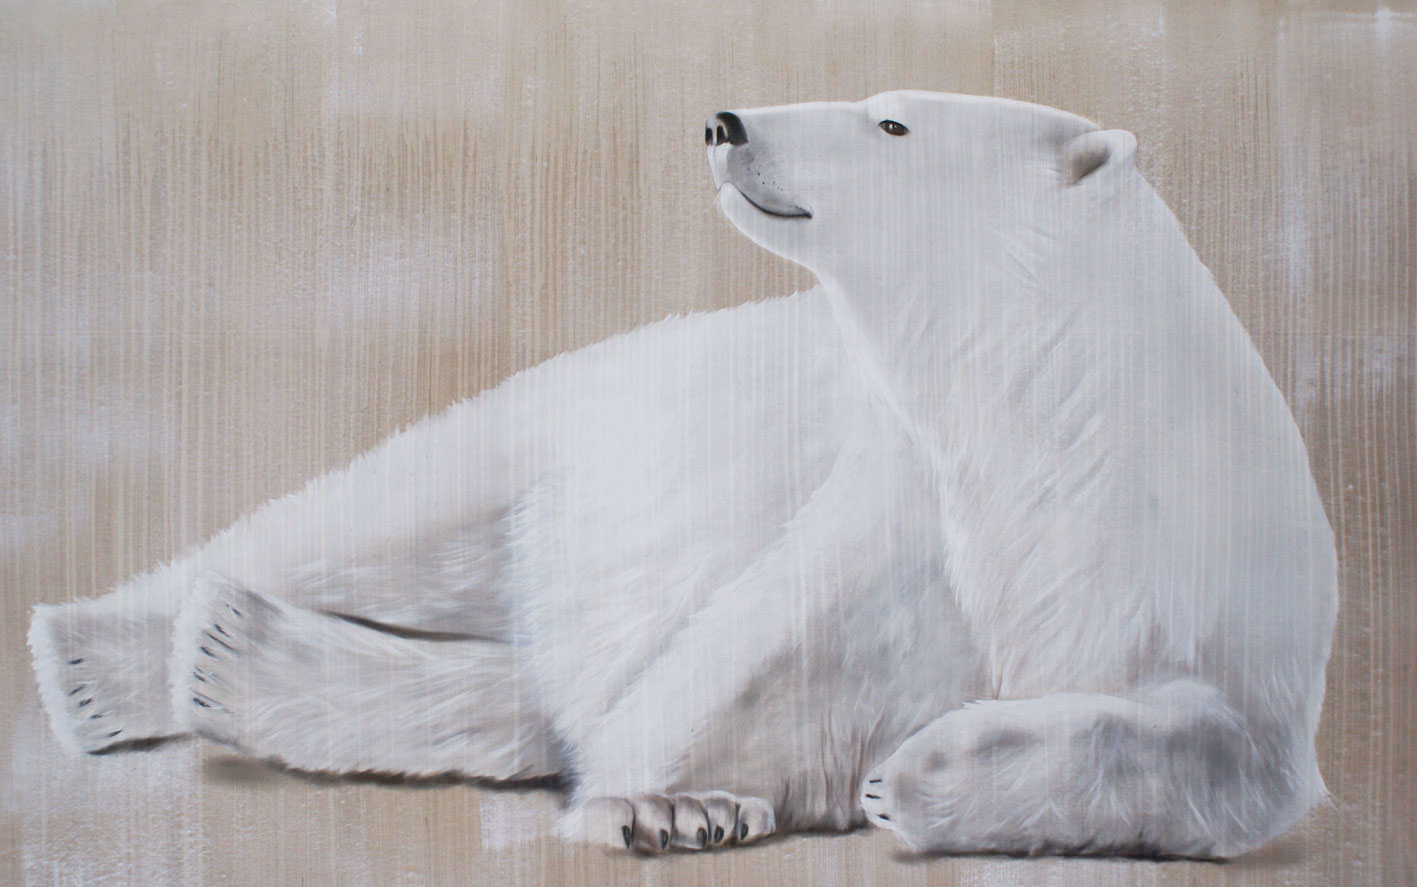 RELAXING-POLAR-BEAR-2 polar-bear-decoration-chalet-mountain-ski-resort-winter-sport-large-format-printed-canvas-high-quality-luxury Thierry Bisch Contemporary painter animals painting art  nature biodiversity conservation 